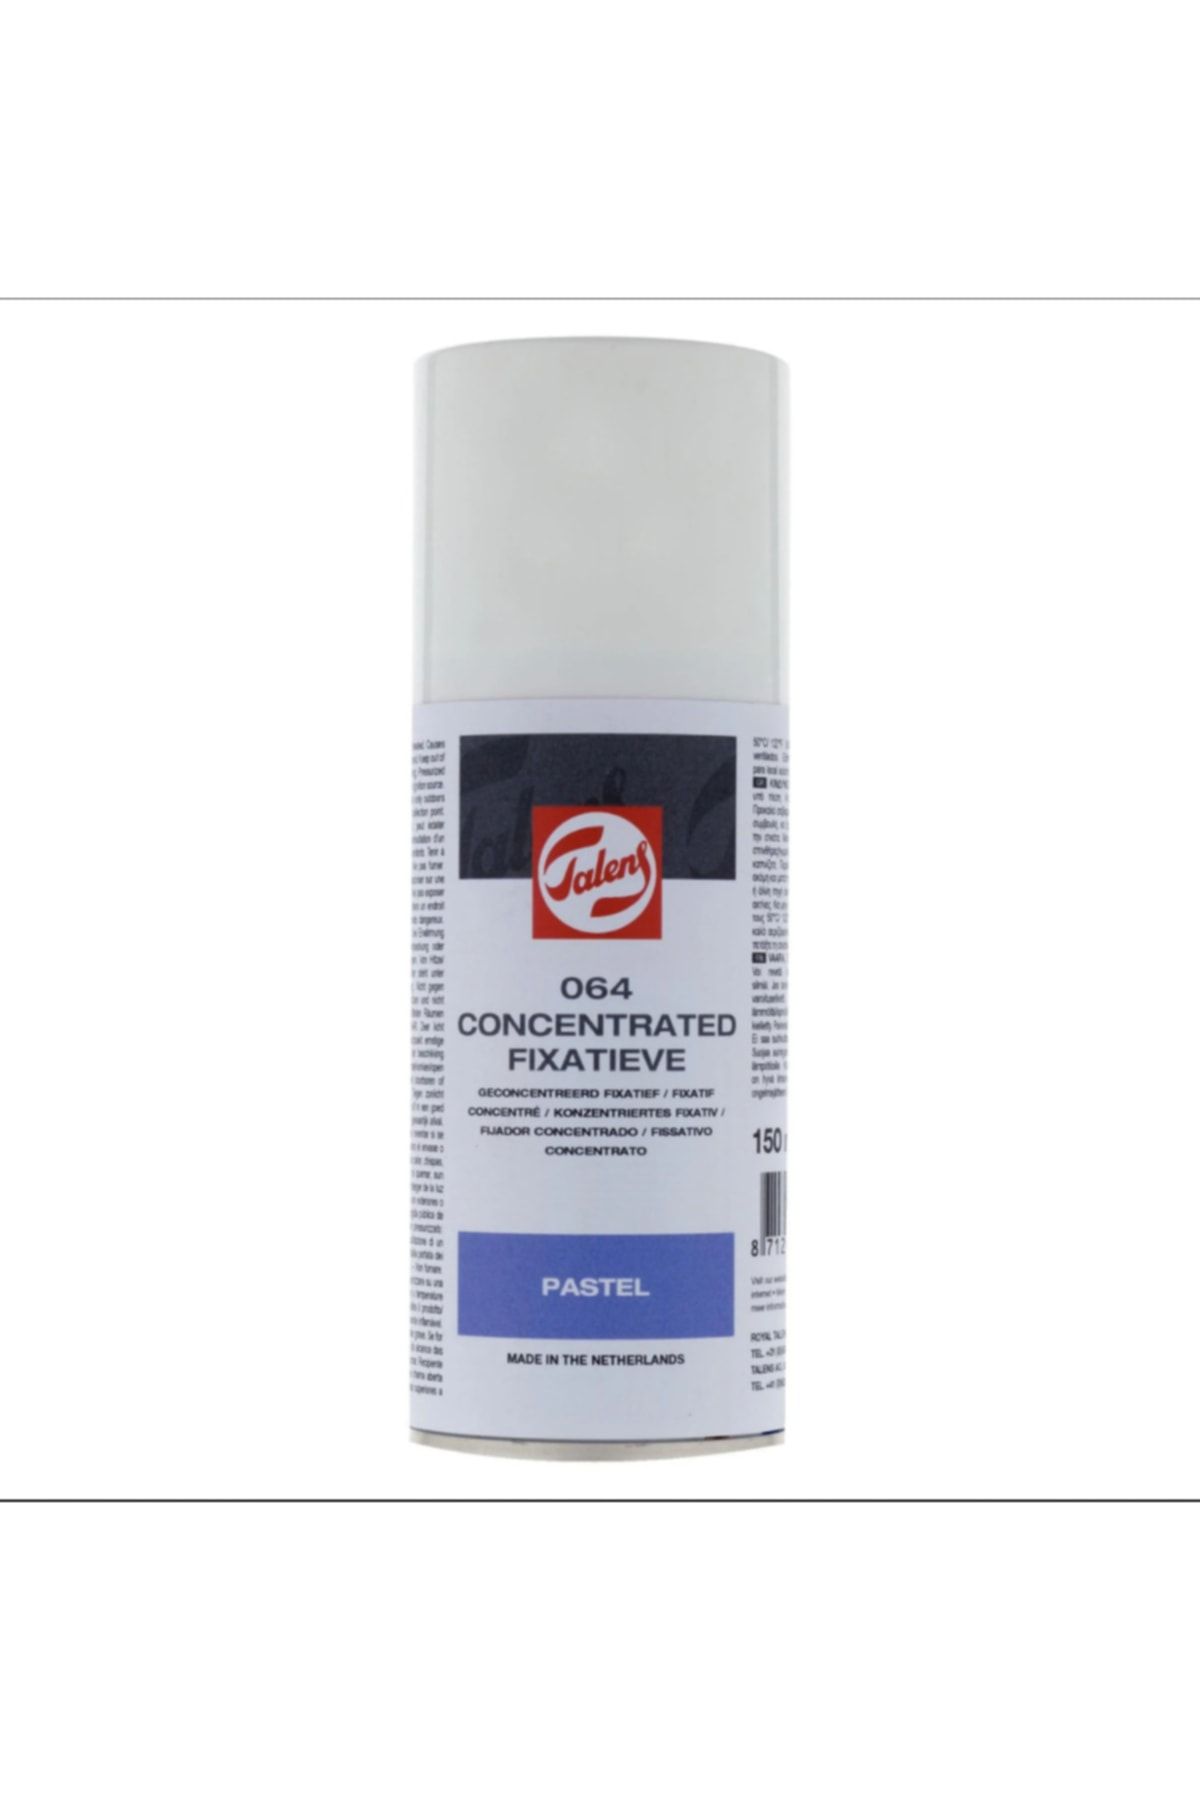 Talens Concentrated Fixative 064 150ml